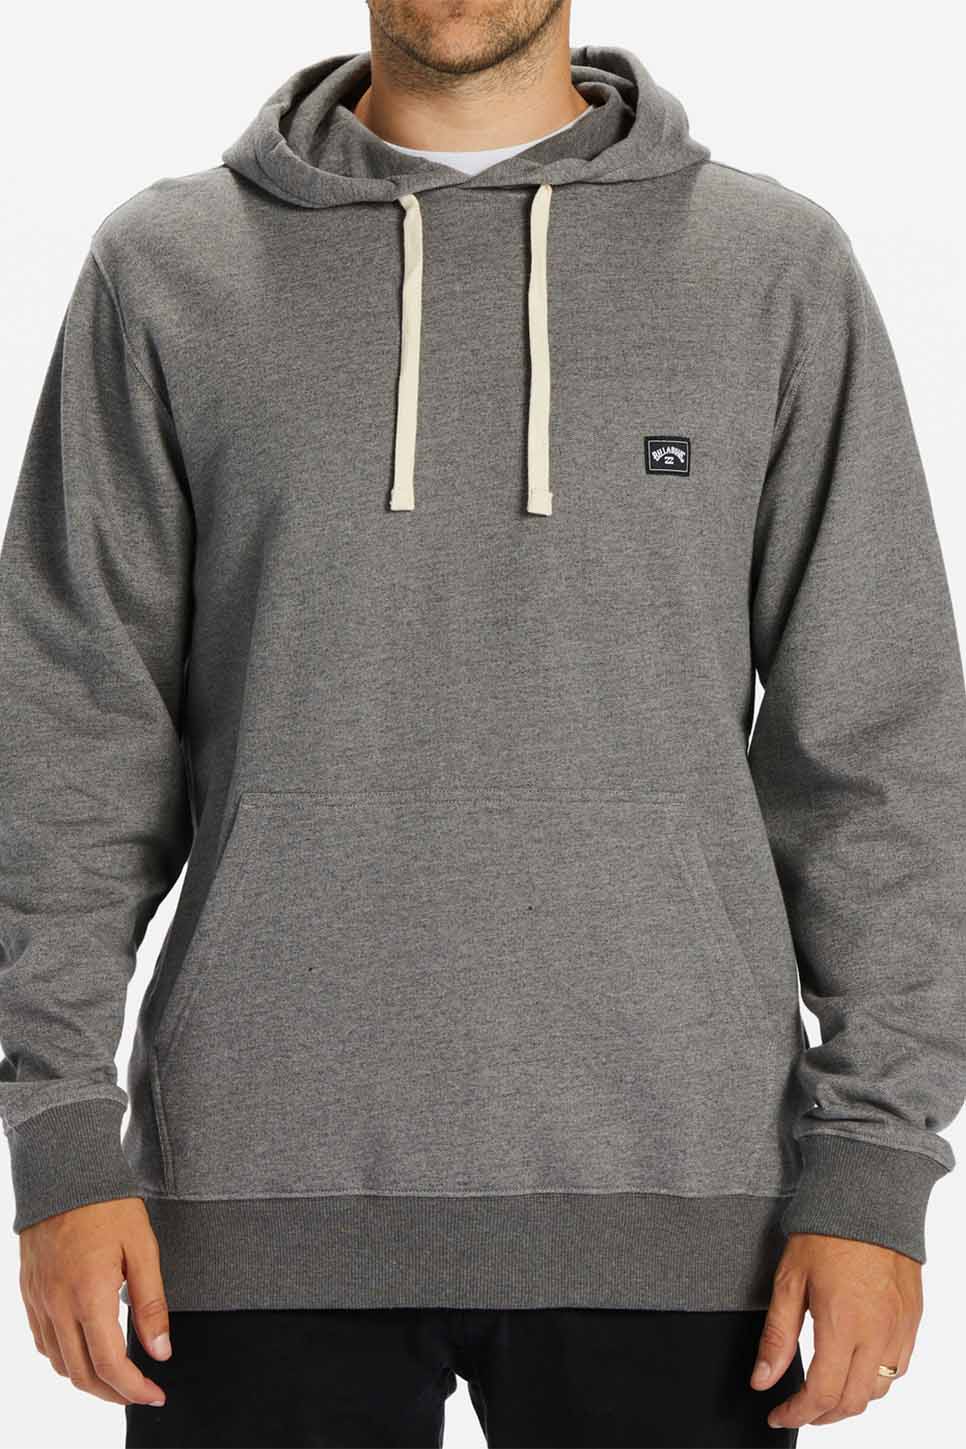 Billabong - All Day PO Hoodie - Light Grey Heather - Front